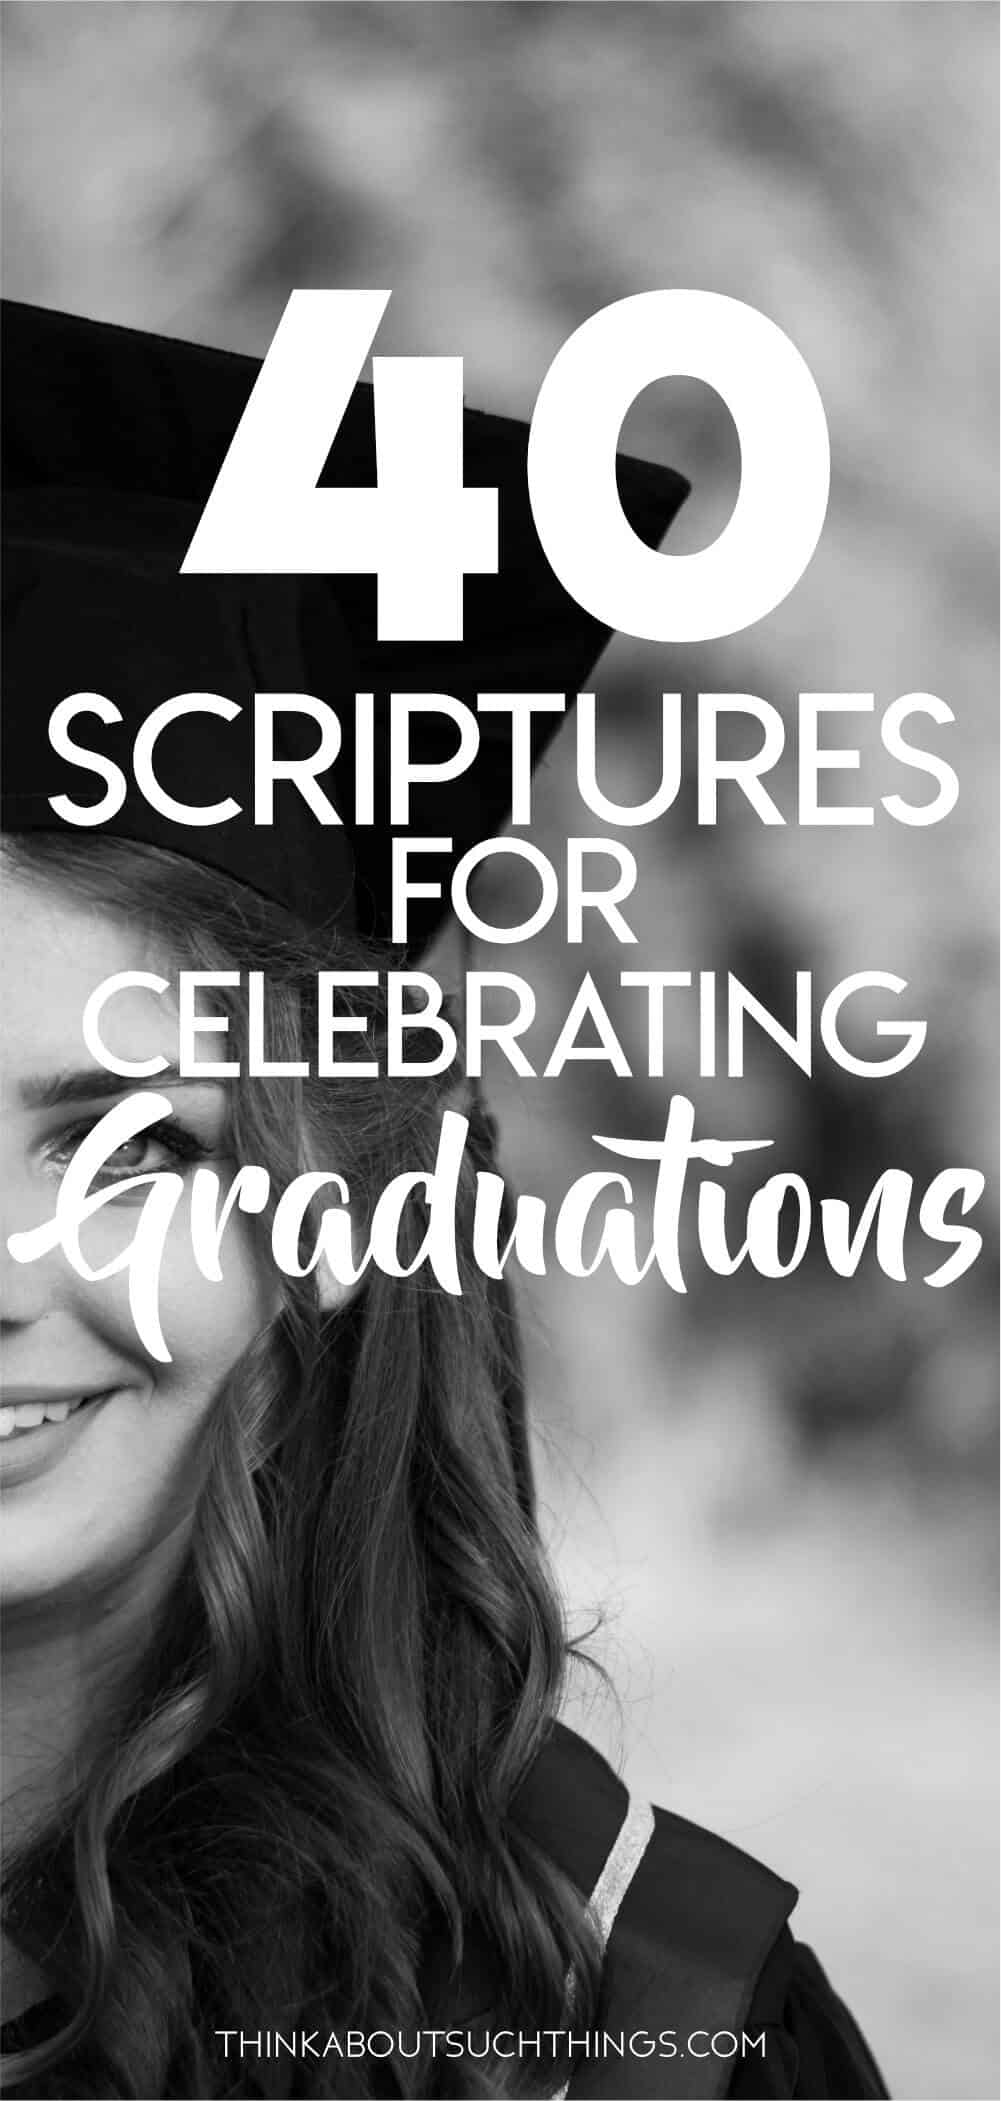 40+ Awe-Inspiring Bible Verses For Graduation | Think About Such Things